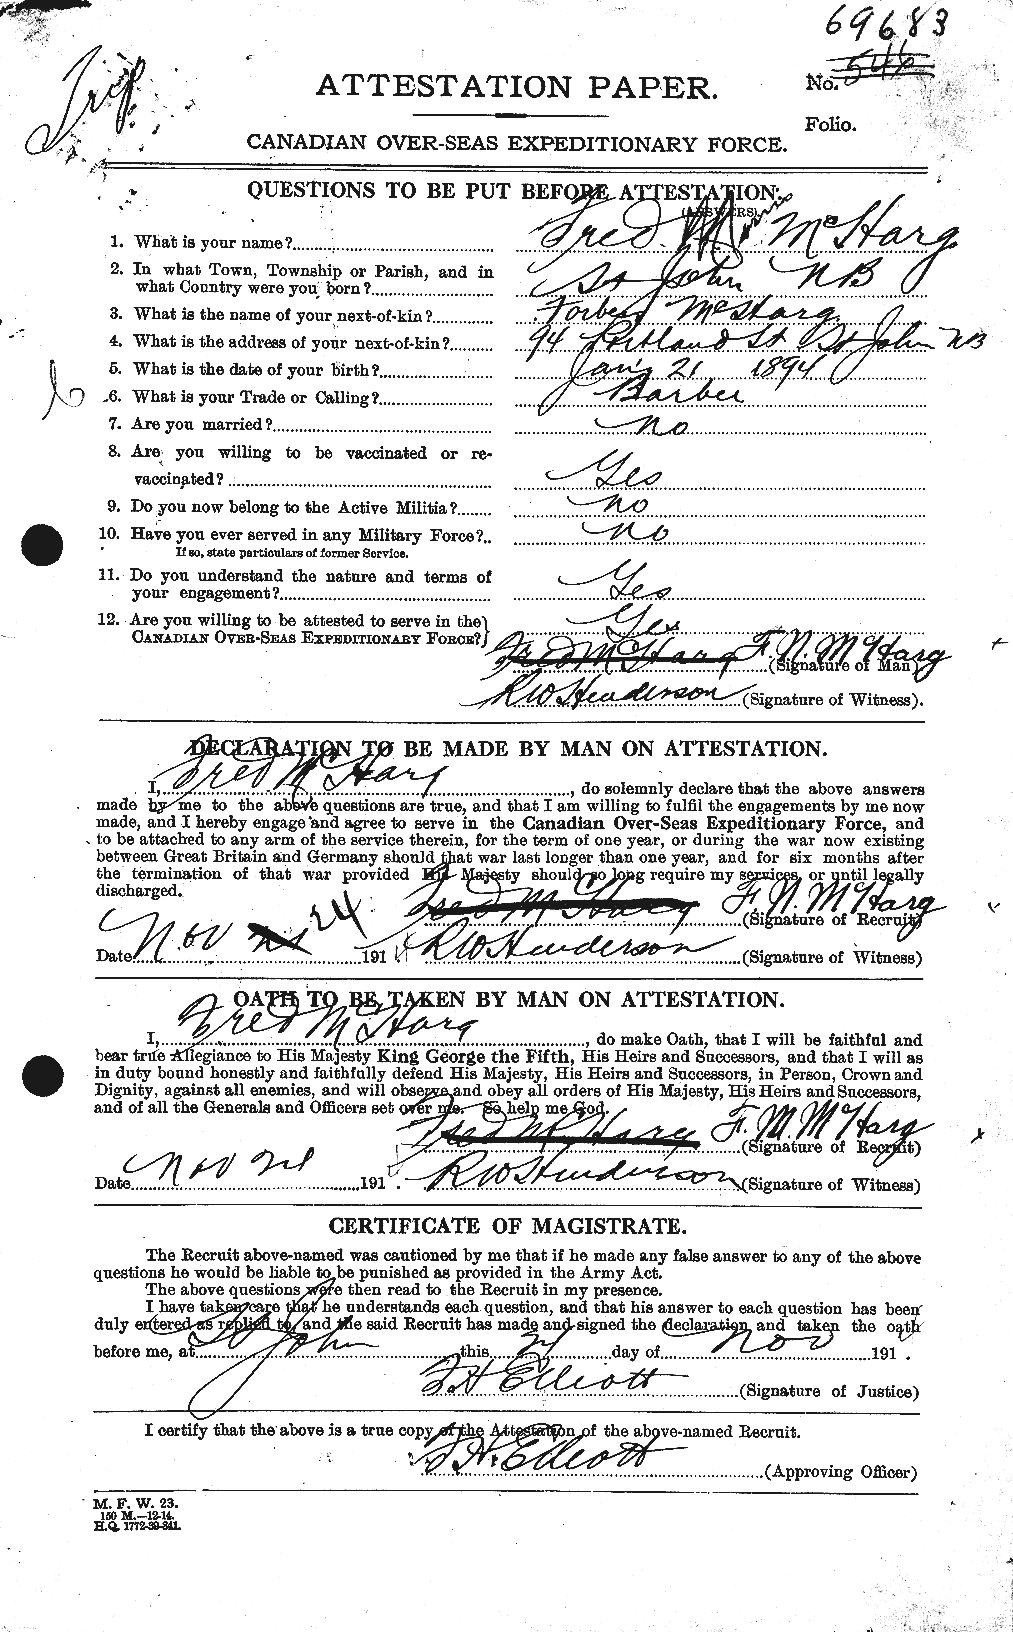 Personnel Records of the First World War - CEF 524252a